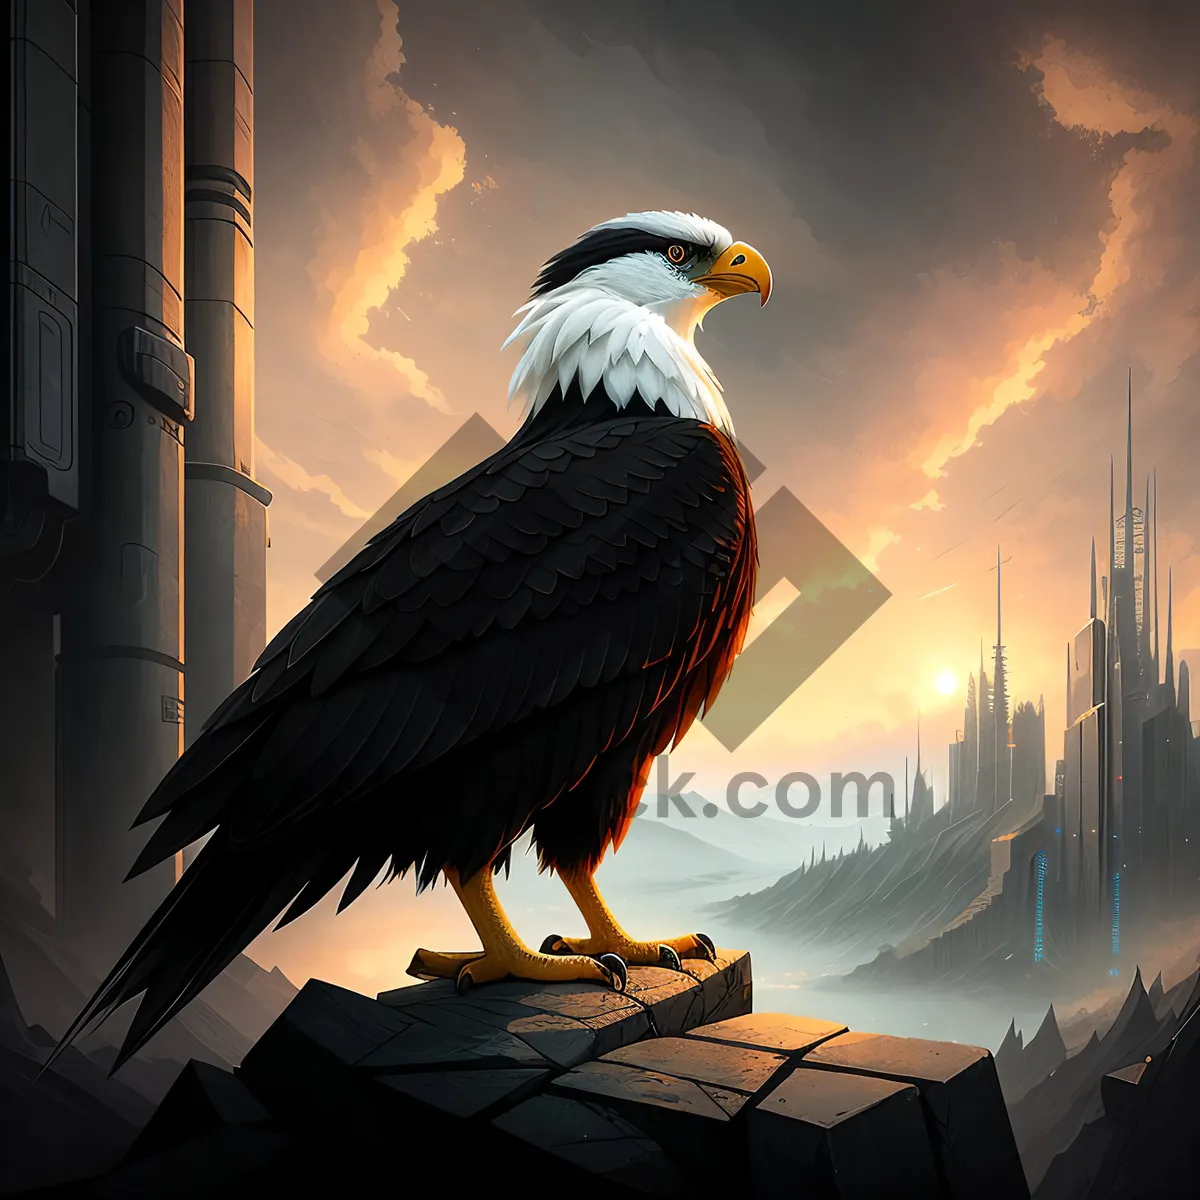 Picture of Majestic Predator in Flight: Bald Eagle Soaring with Intensity